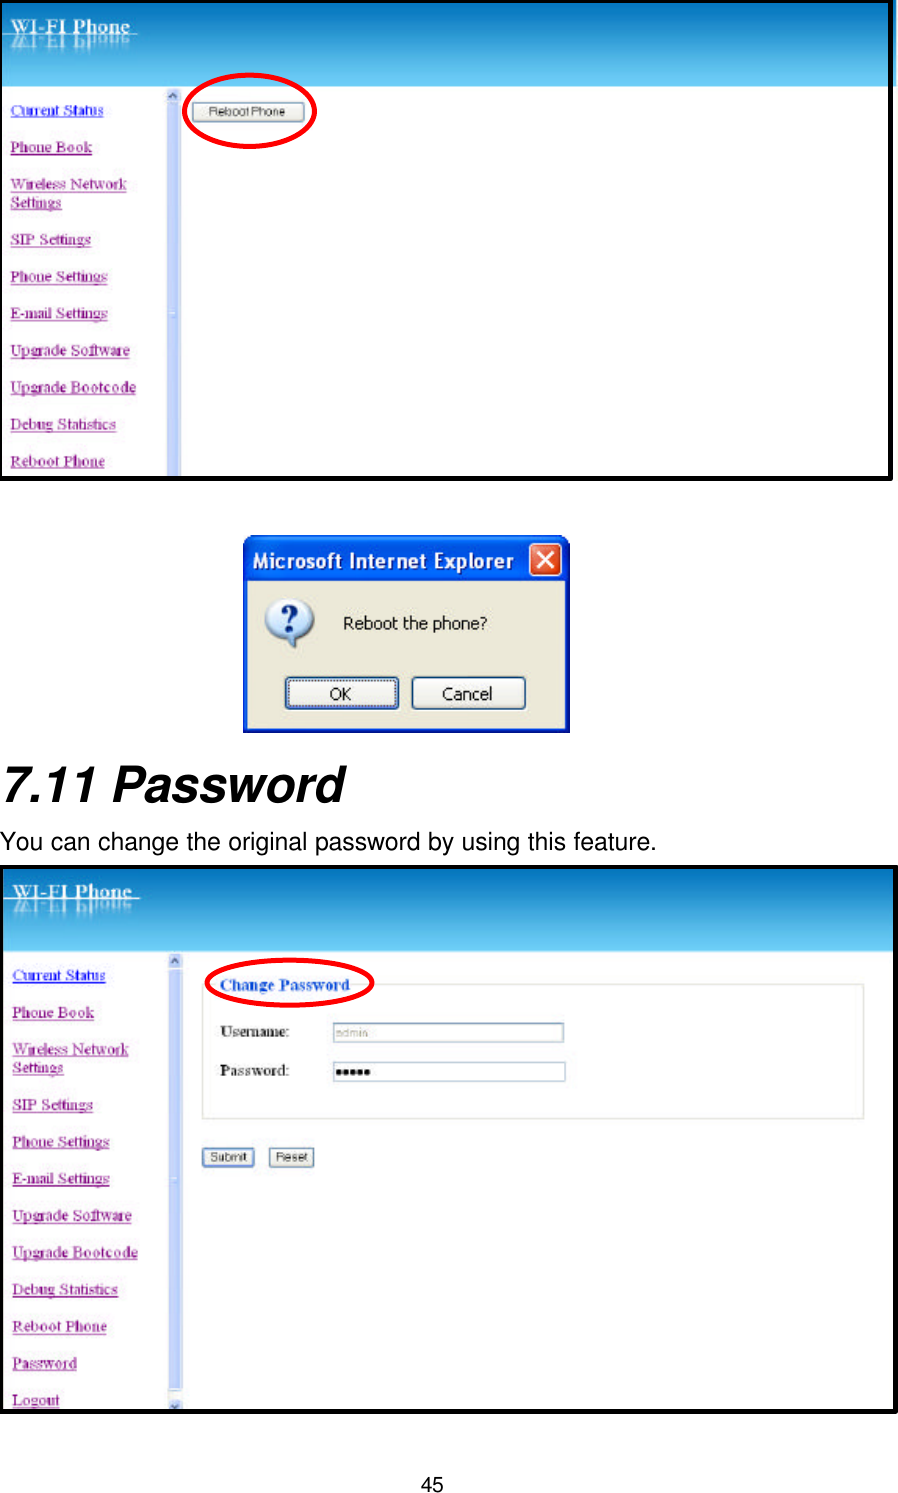  45   7.11 Password You can change the original password by using this feature. 